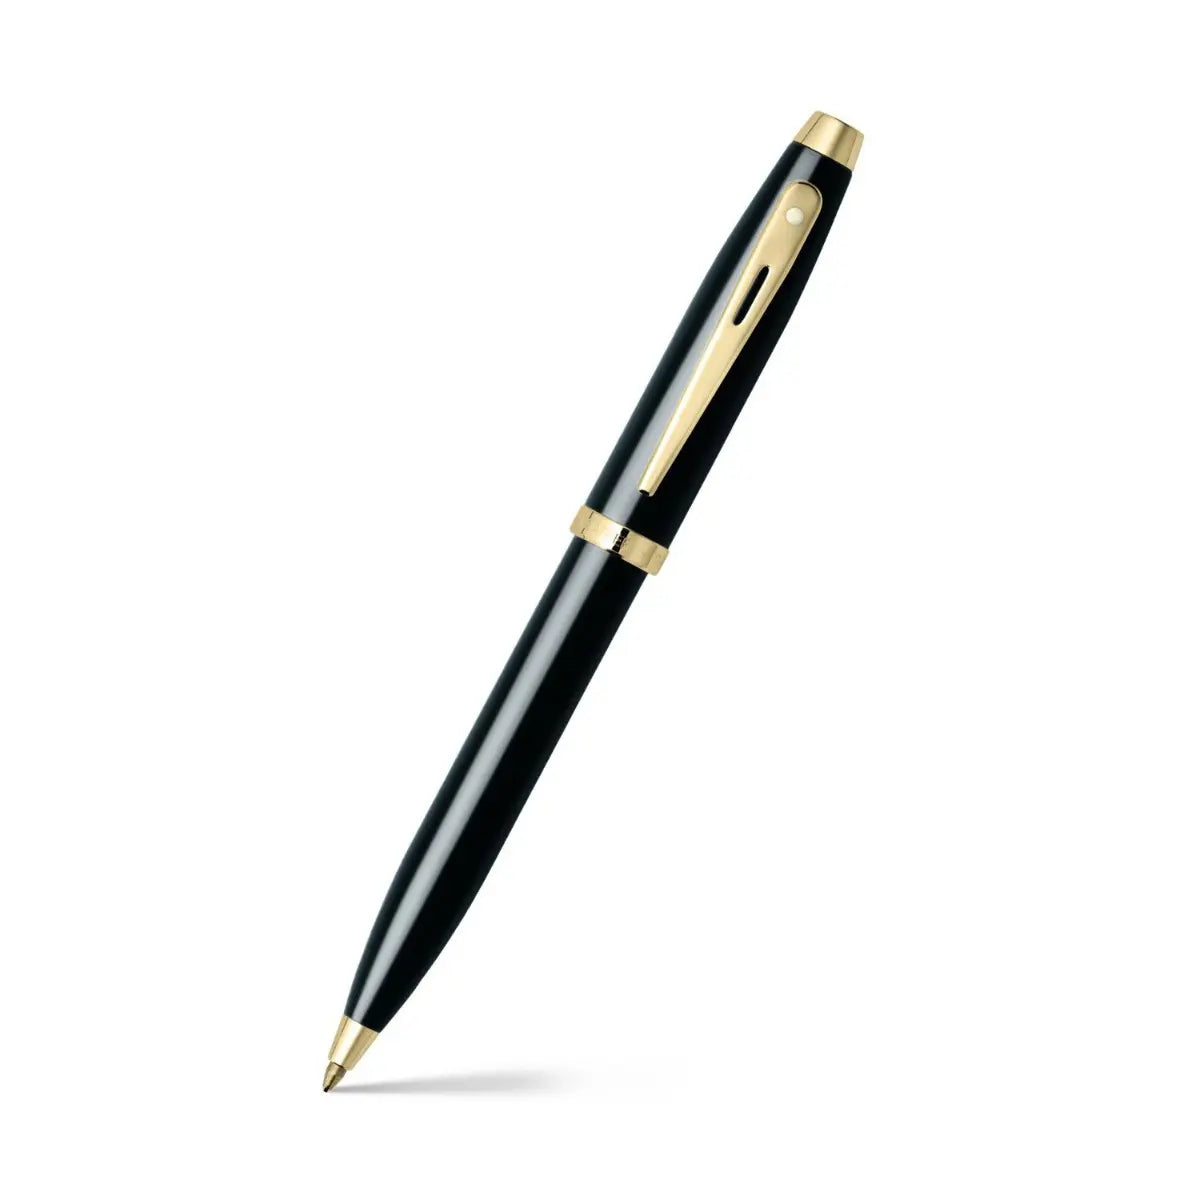 Sheaffer® Gift Set ft. Glossy Black S100 9322 Ballpoint Pen with Gold Tone Trim and Medium Notebook